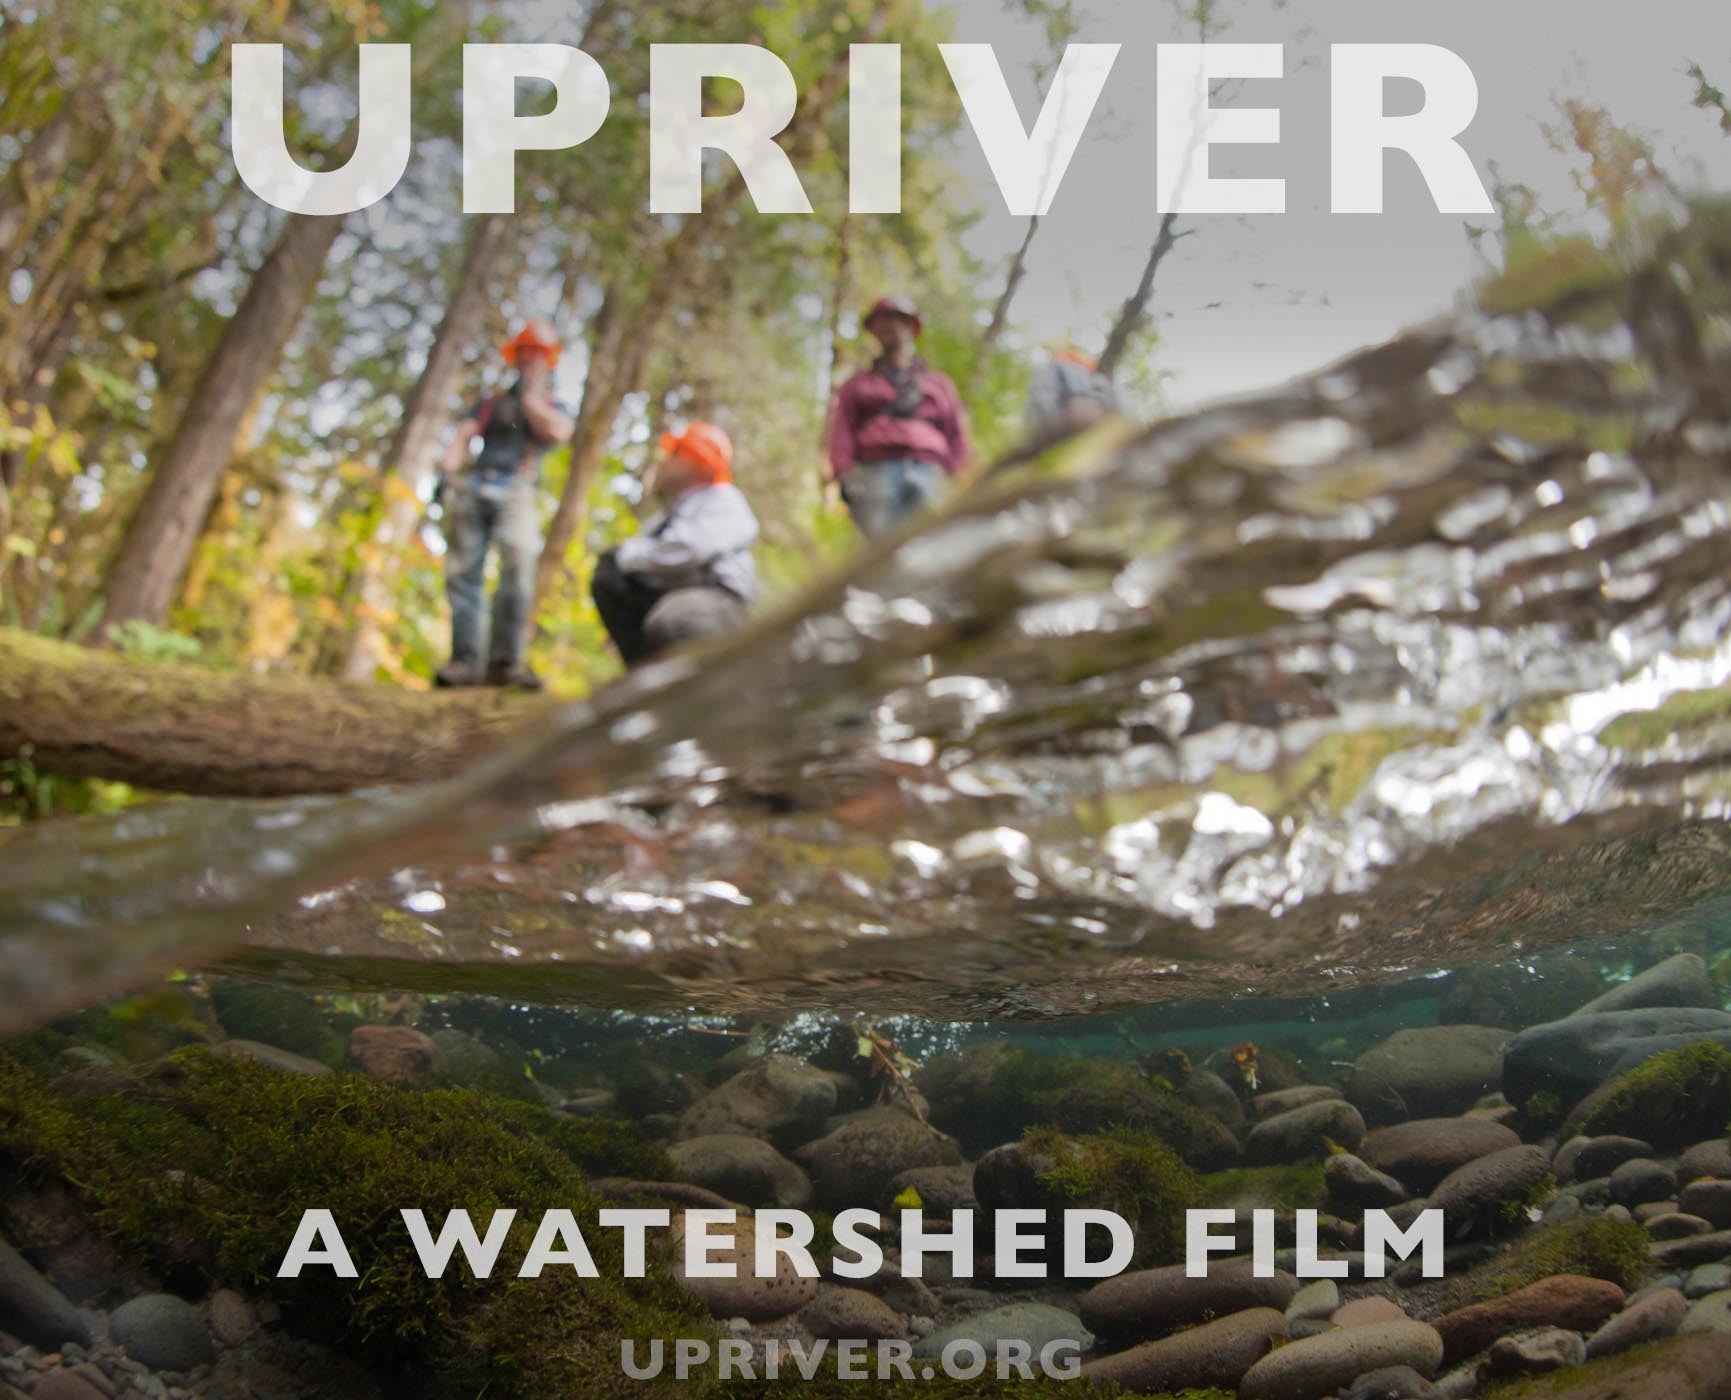 Upriver: A Watershed Film